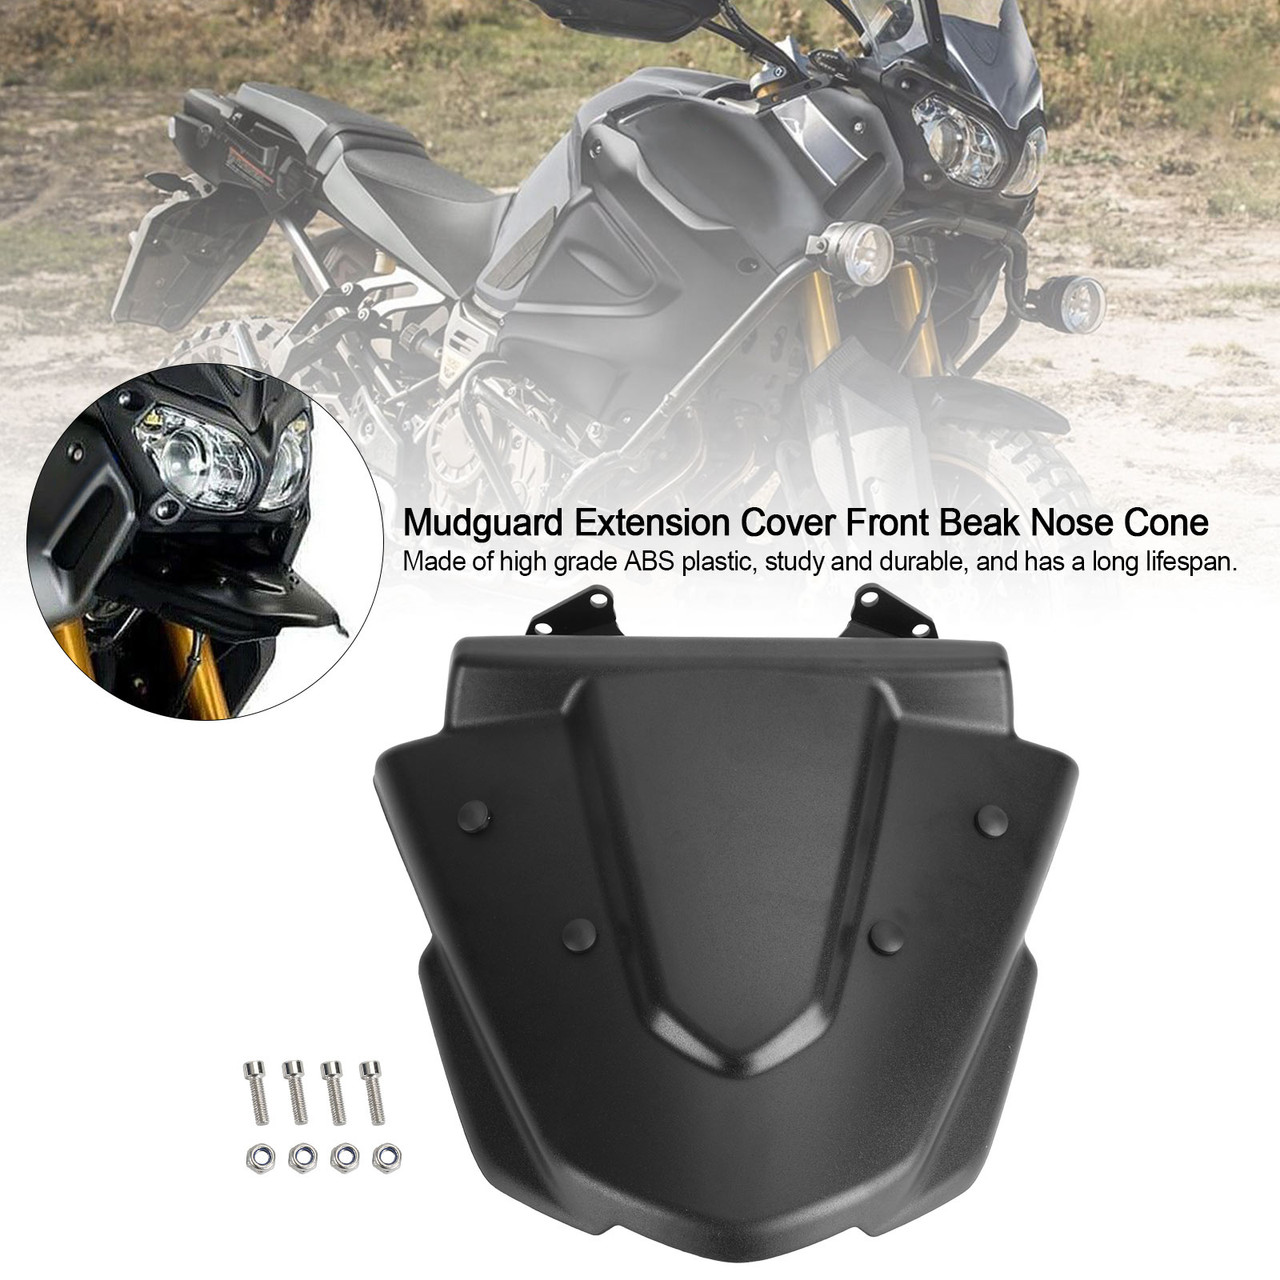 Mudguard Extension Cover Front Beak Nose Cone Fit For Yamaha XT1200Z 2014-2021 BLK